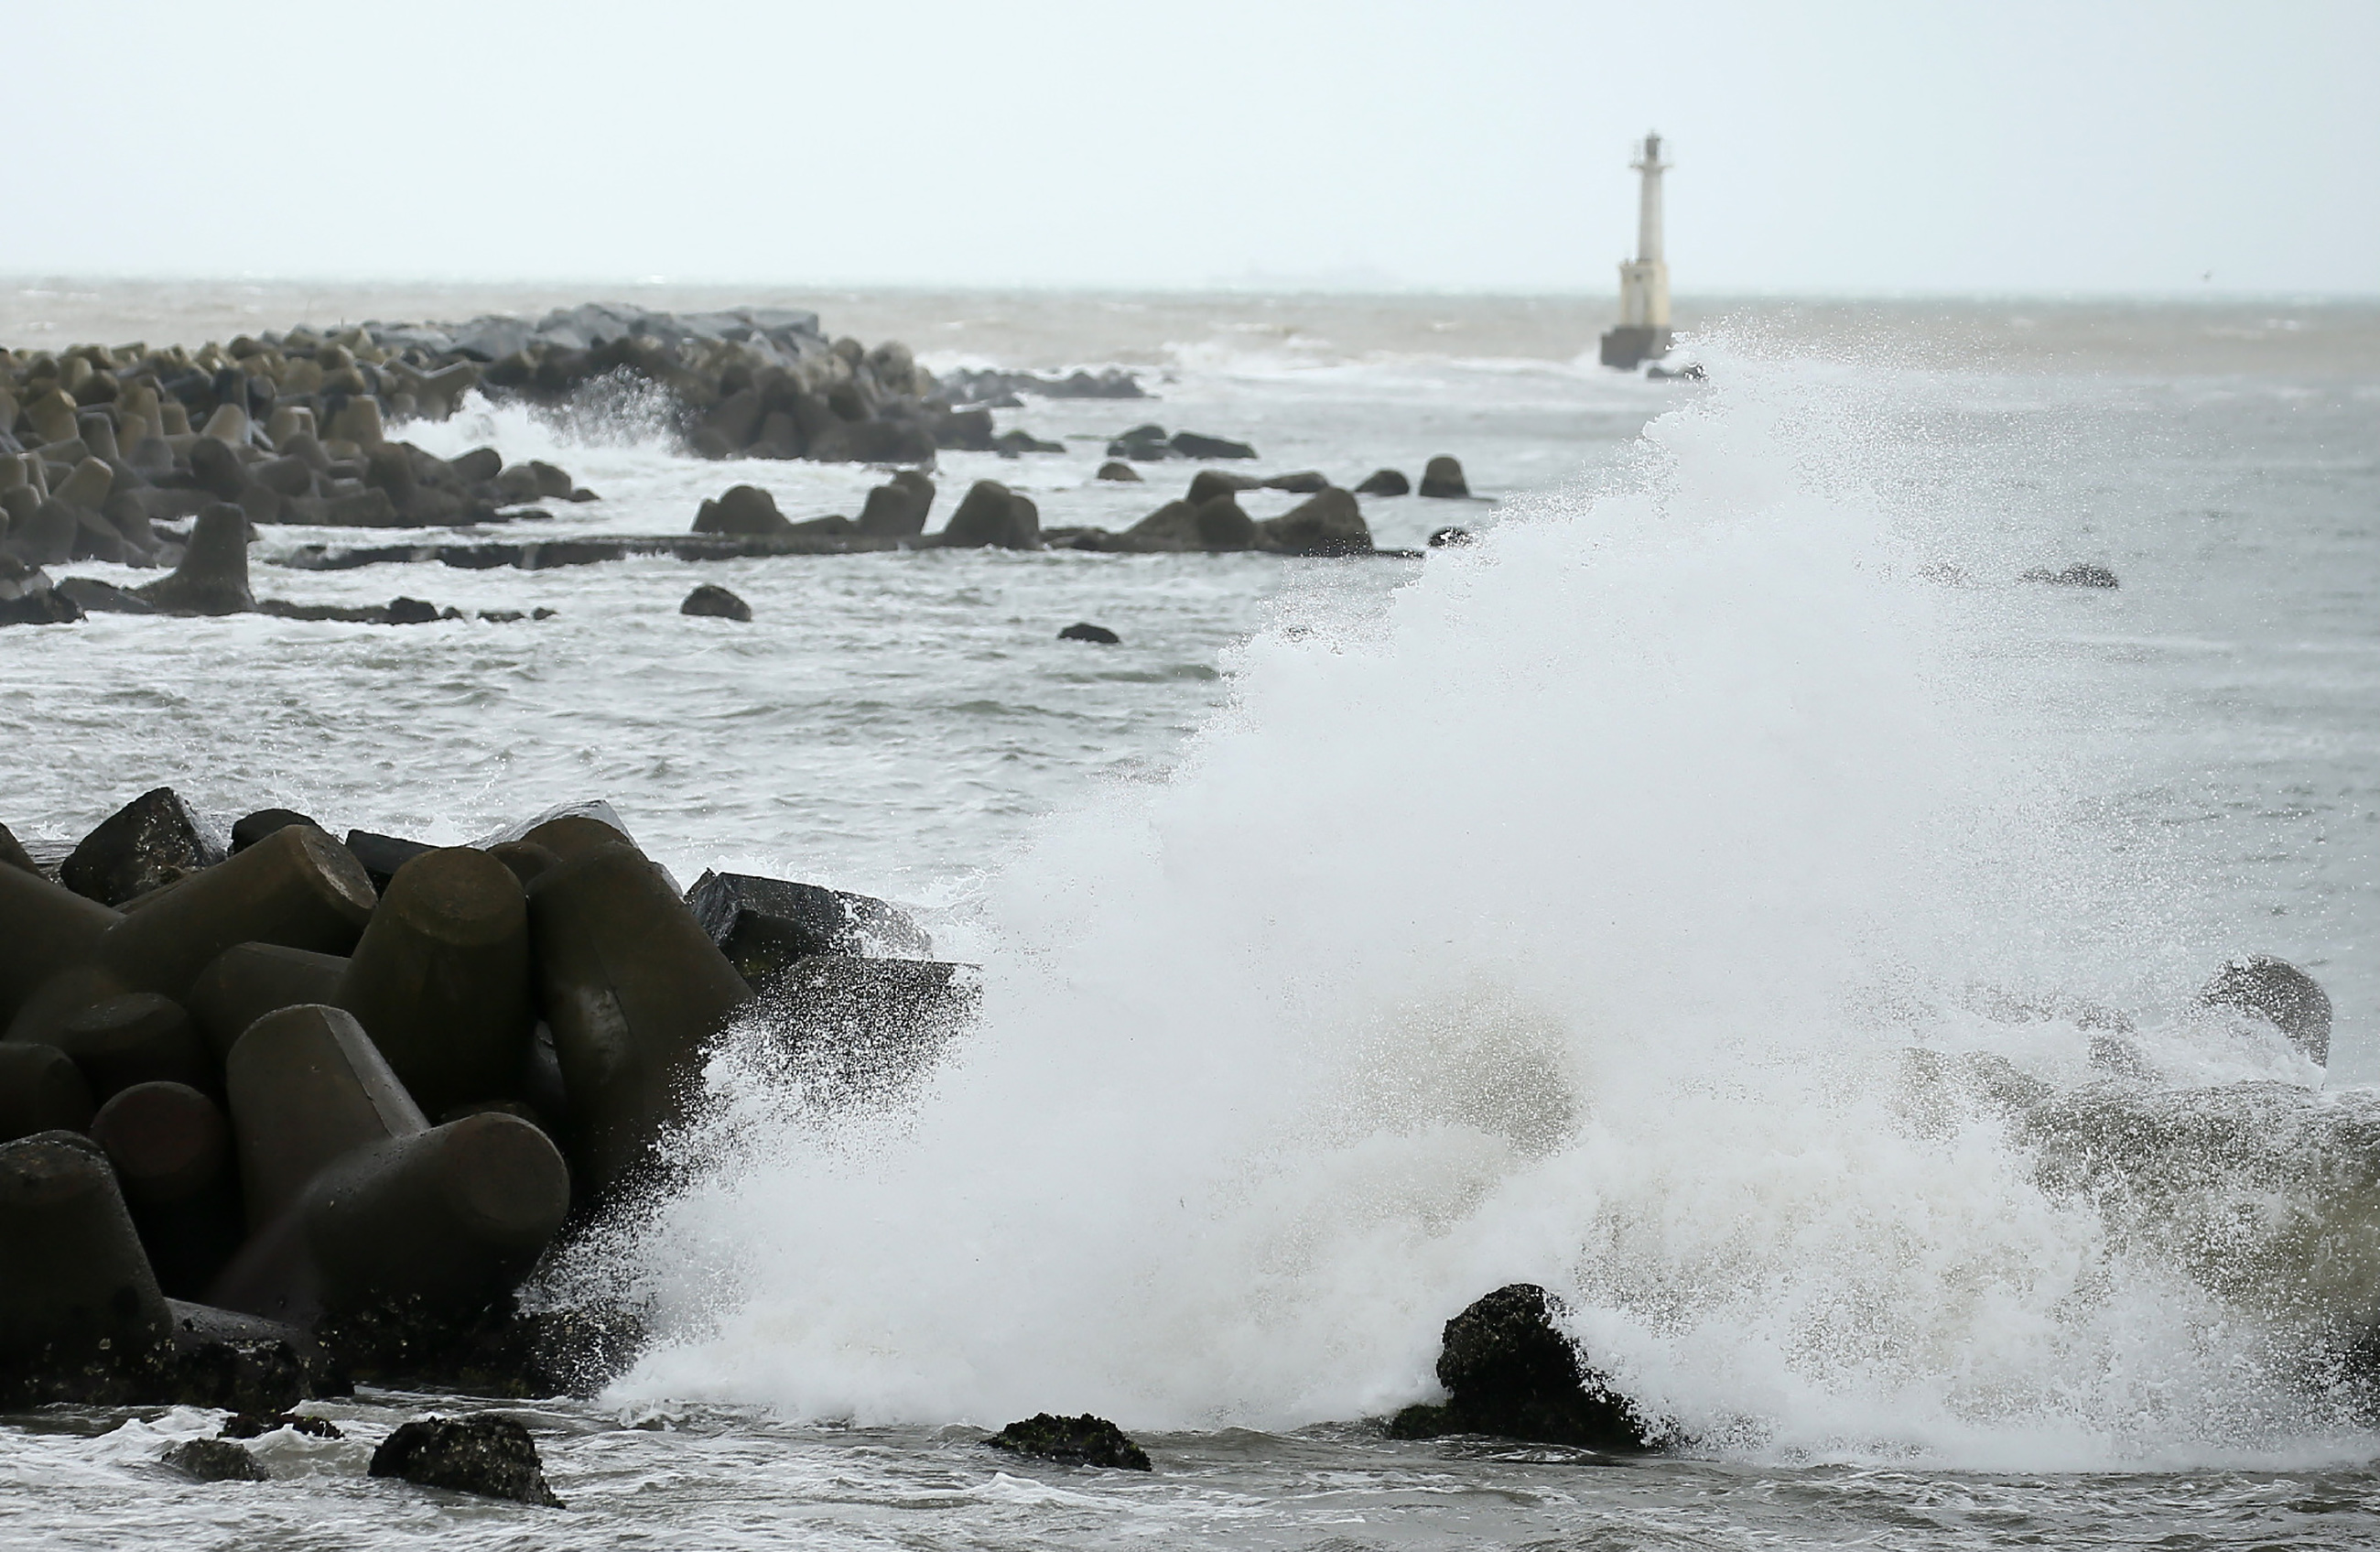 Waves beat against the seashore in Ishinomaki, Miyagi prefecture, on August 30, 2016 as Typhoon Lionrock makes its course towards northeastern Japan. A strong typhoon was on course to directly hit Japan's northeast on August 30, with authorities warning of heavy rain and high waves along the Pacific coast devastated by the 2011 monster tsunami. / AFP PHOTO / JIJI PRESS / JIJI PRESS / Japan OUT